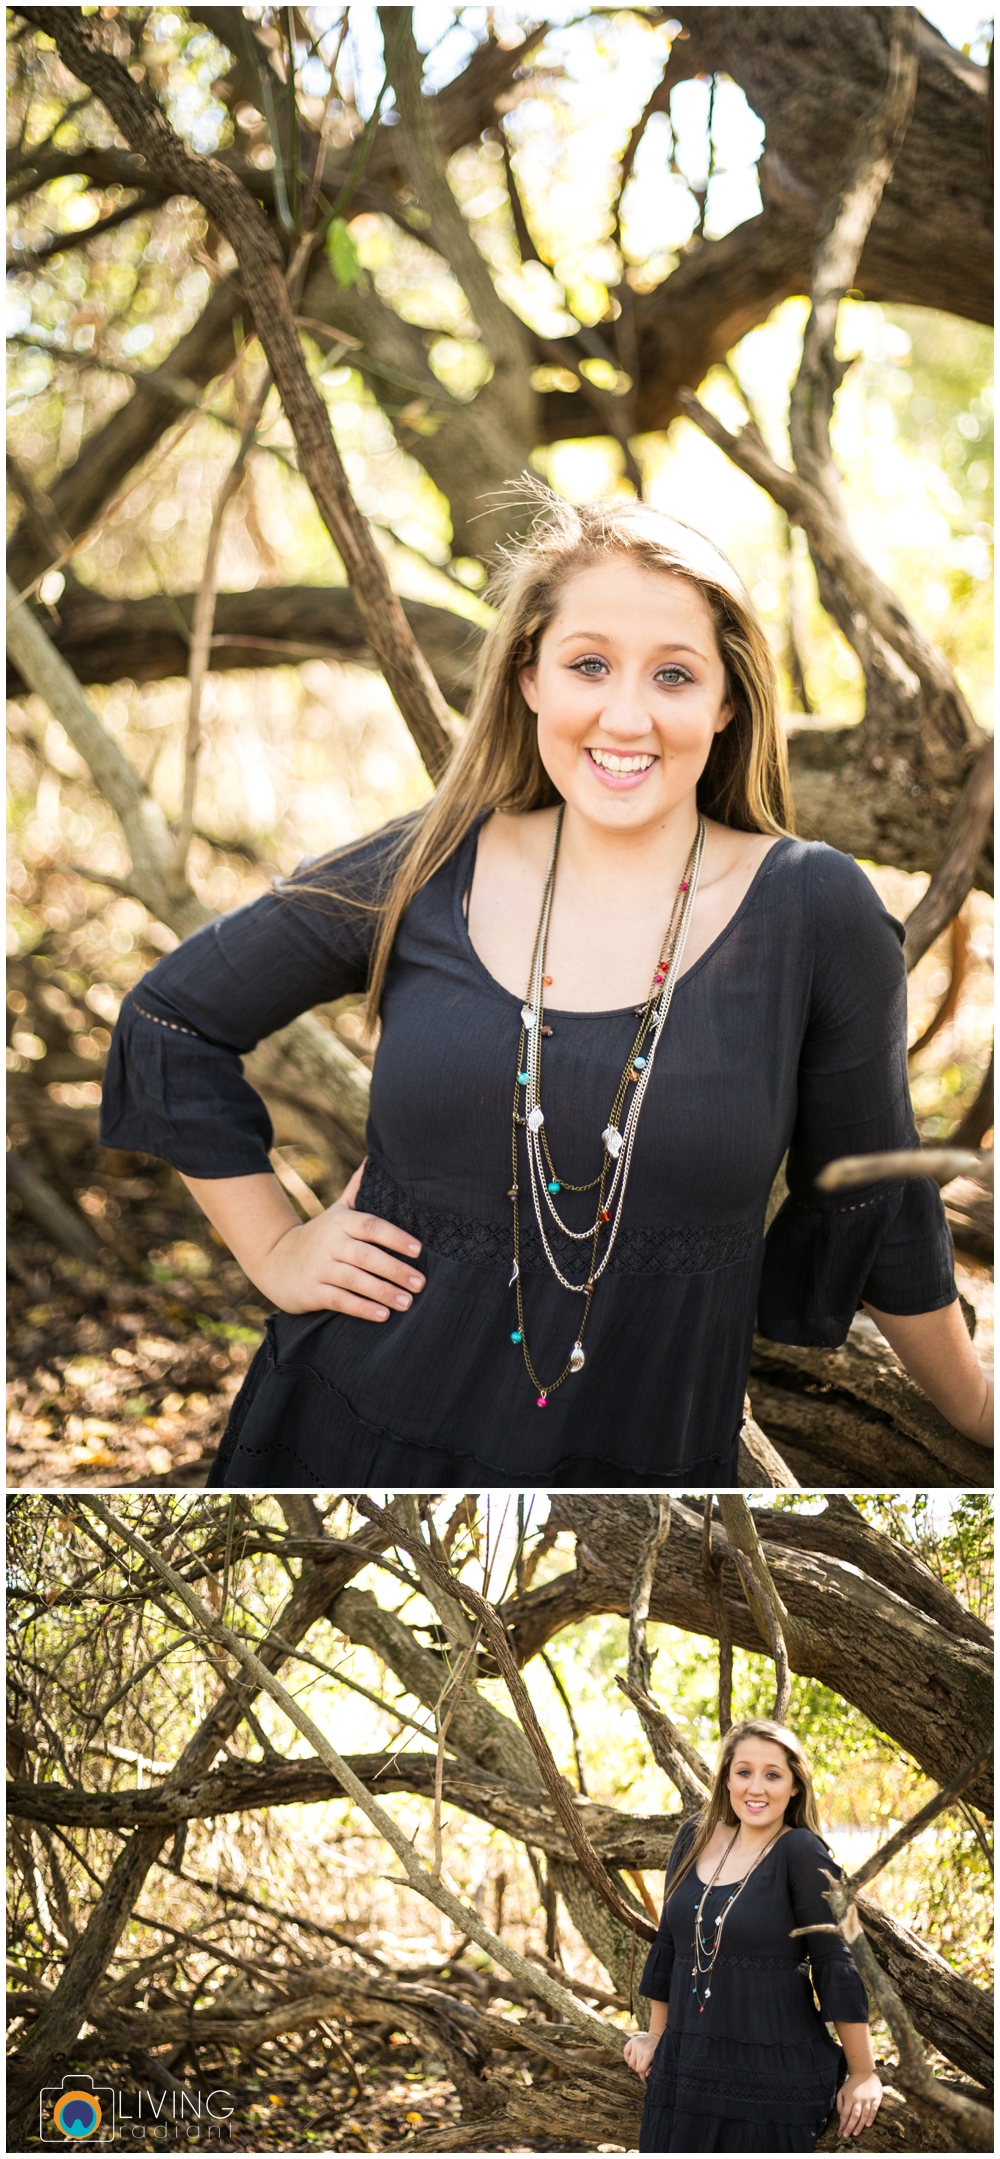 grace-nale-senior-portraits-outdoor-fall-living-radiant-photography-stomped_0006.jpg